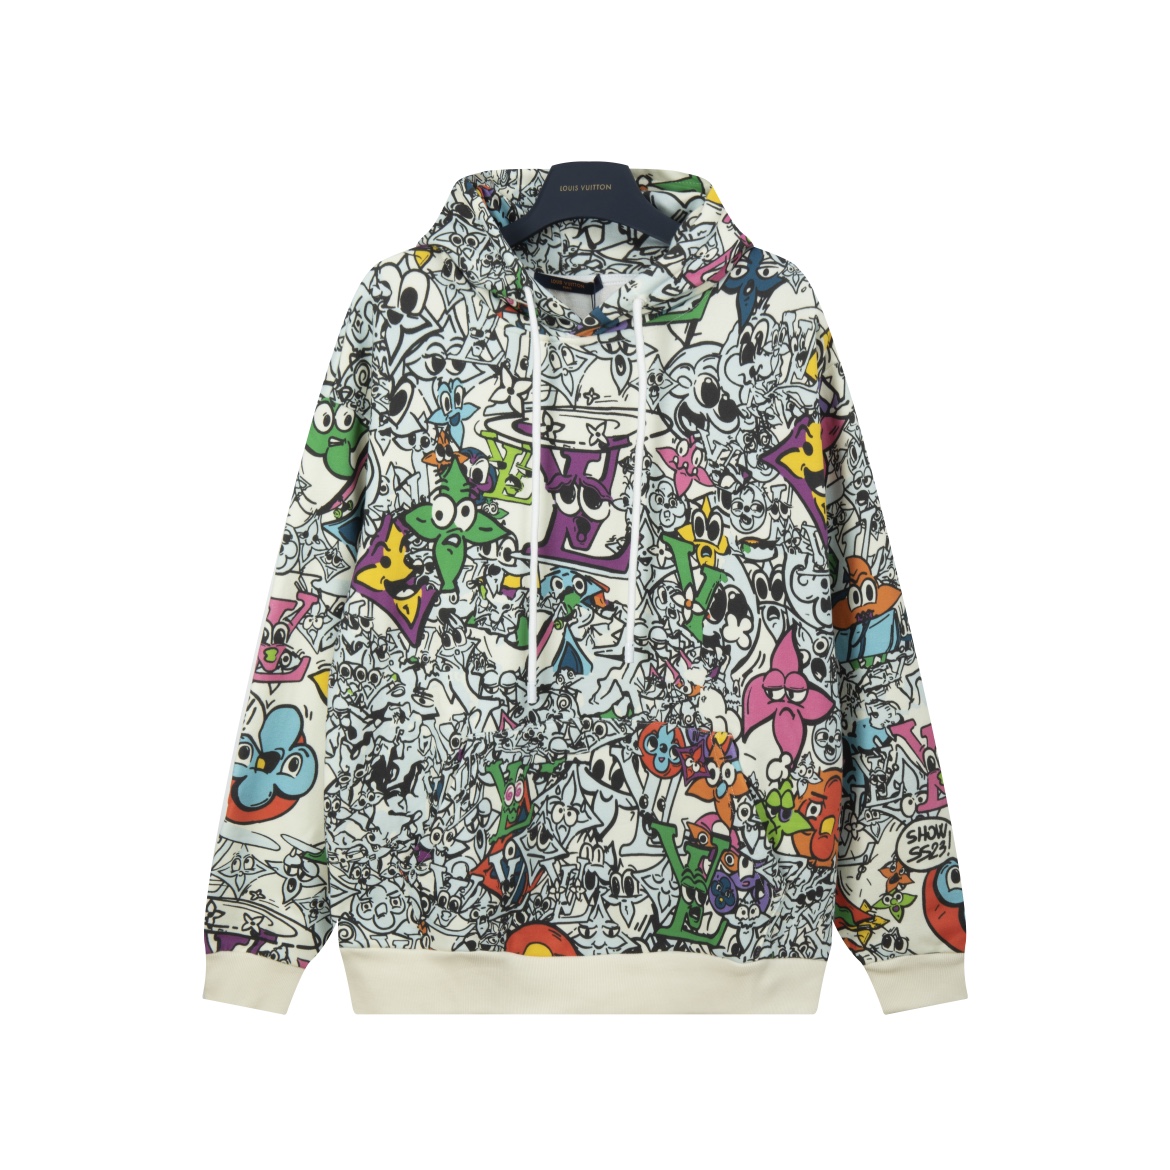 Louis Vuitton Clothing Hoodies White Printing Cotton Hooded Top